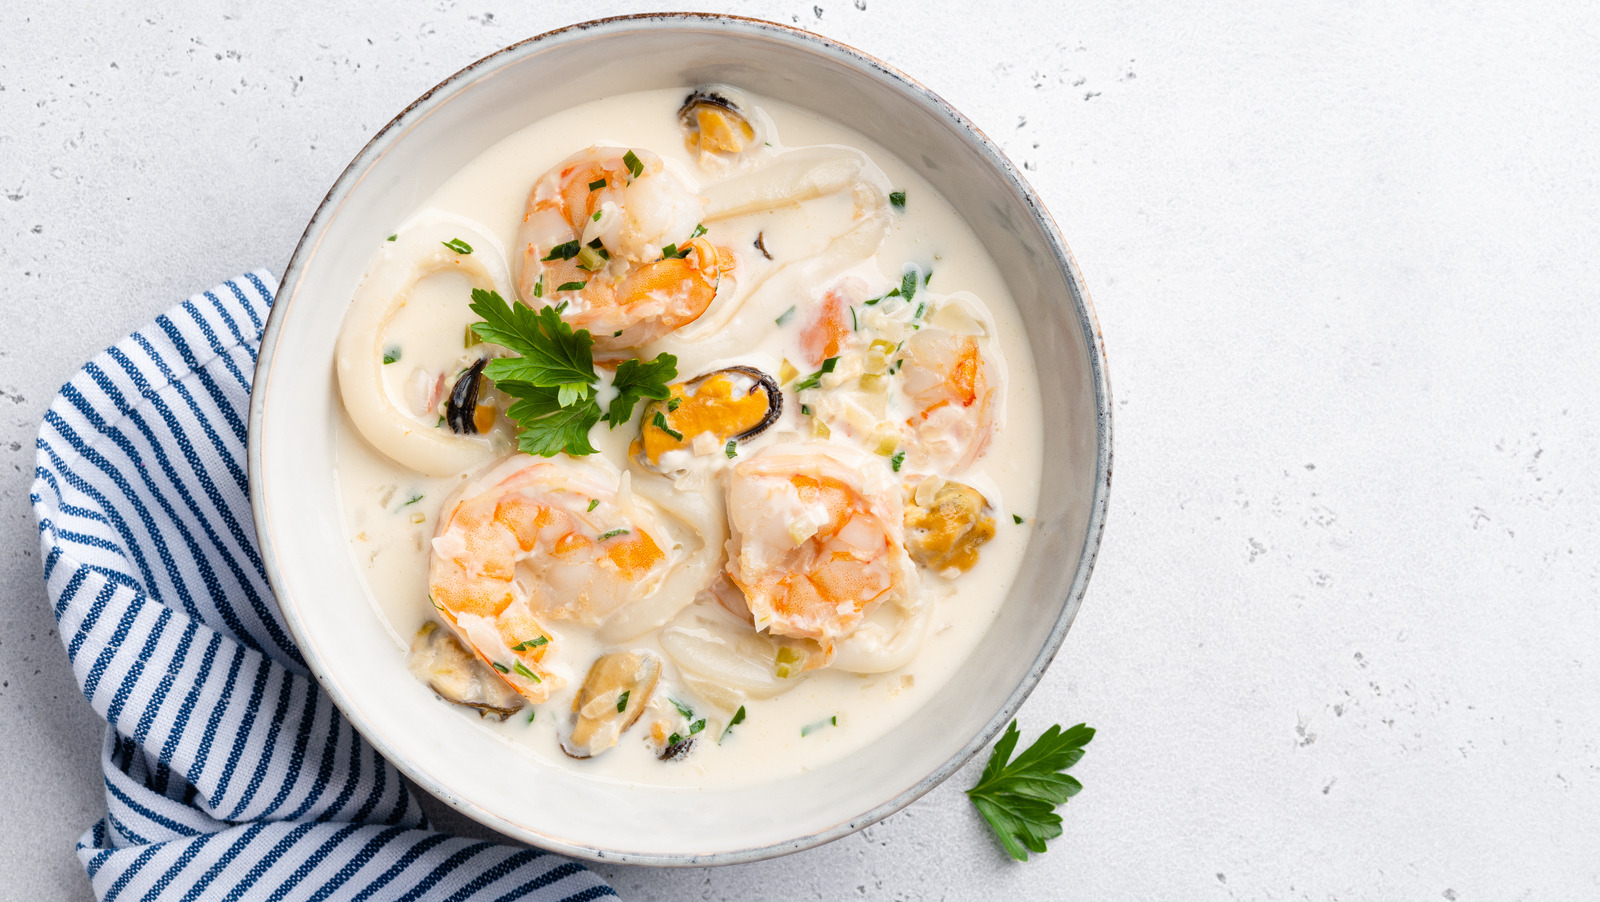 https://www.thedailymeal.com/img/gallery/homemade-fish-stock-is-key-for-for-flavorful-chowder/l-intro-1672982956.jpg